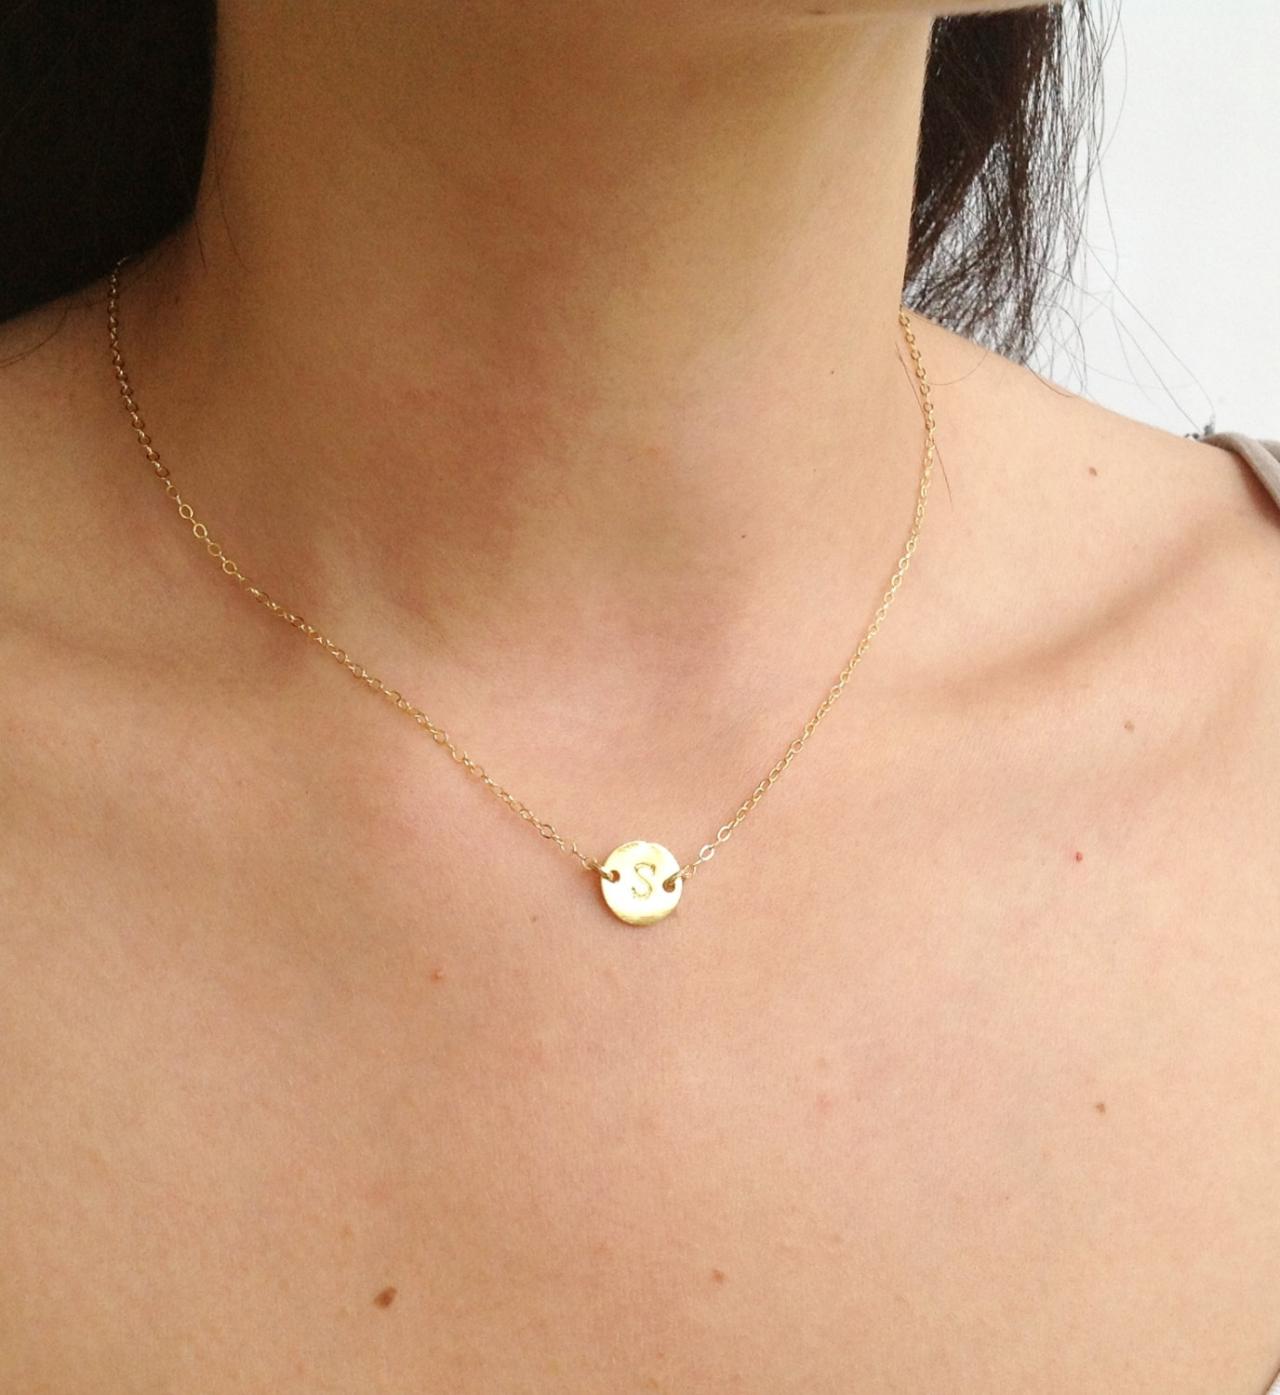 Initial Necklace, Initial Jewelry, Personalized Necklace, Gold Initial Necklace, Monogram Necklace, Friendship, 14k Gold Filled -537